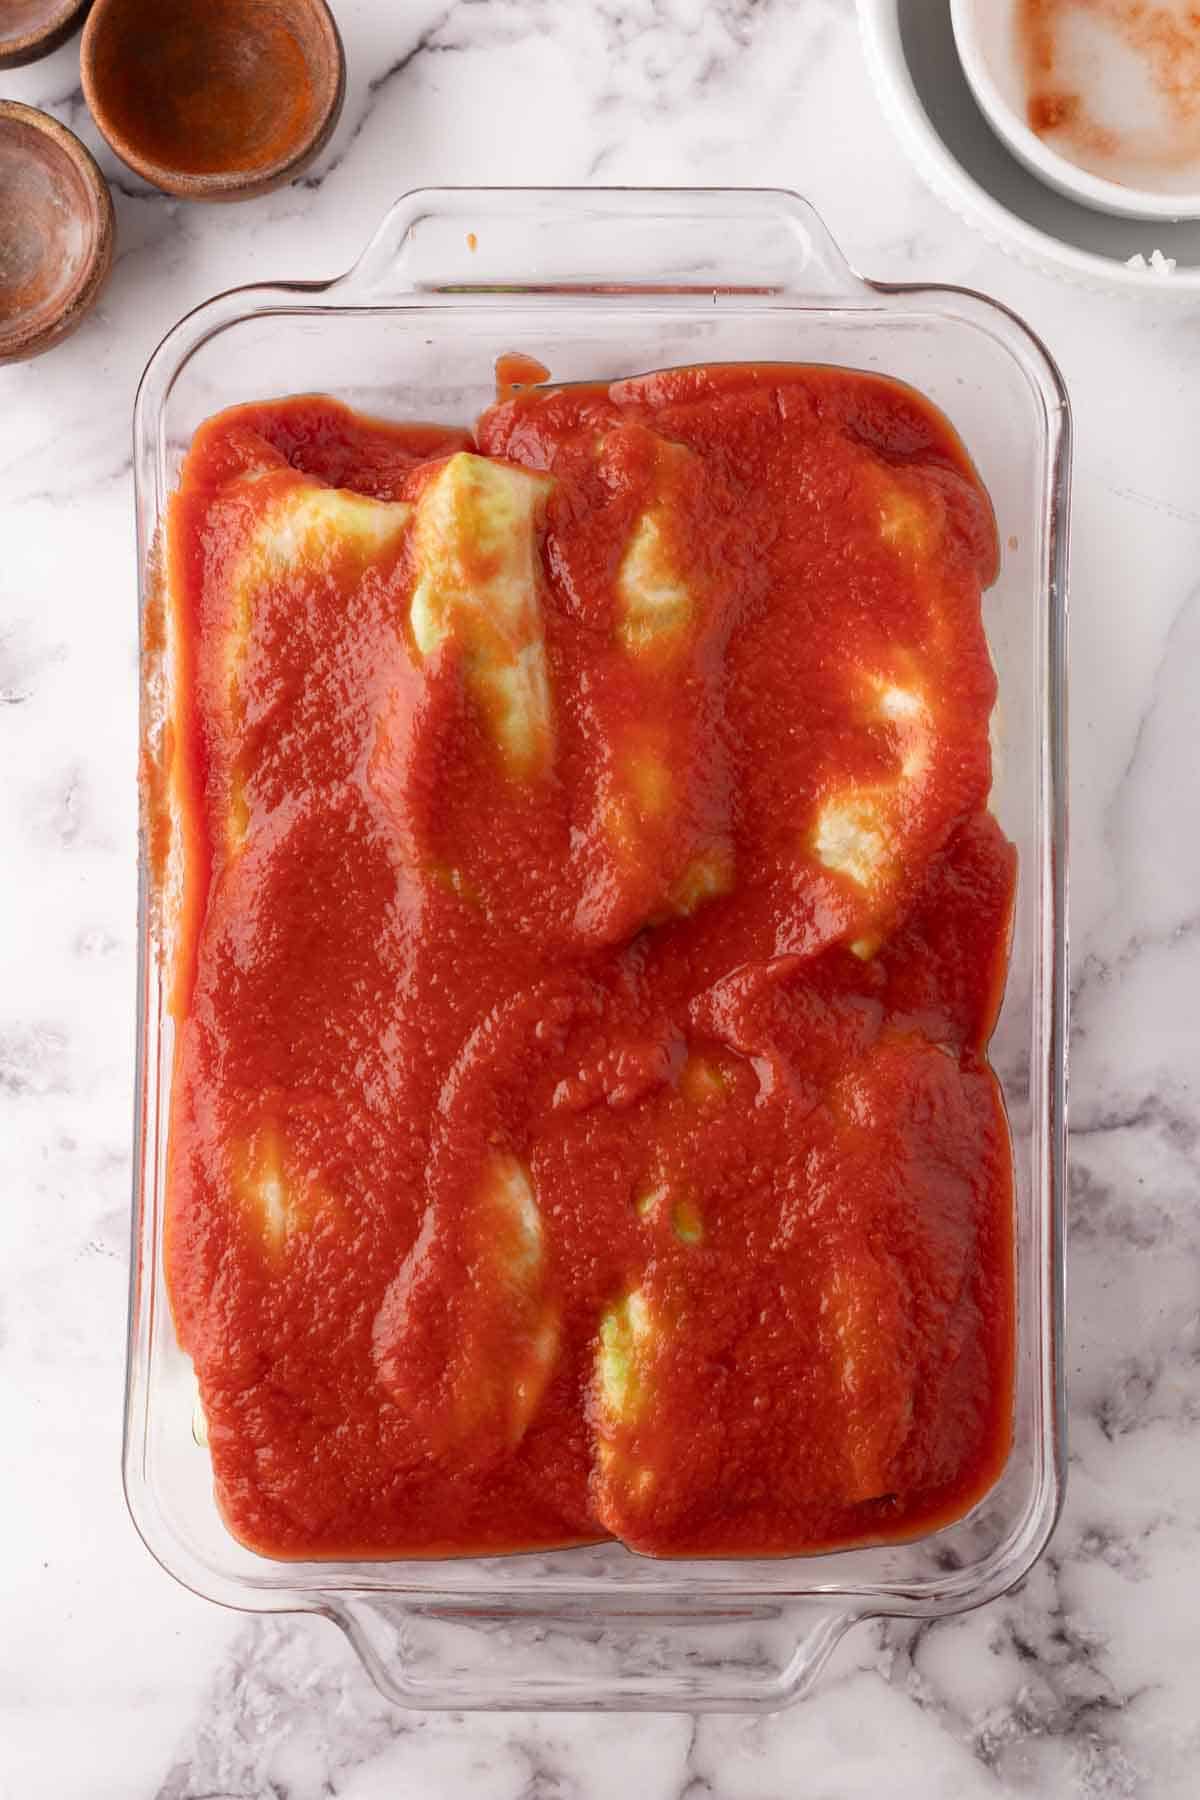 raw cabbage rolls in a glass baking dish smothered in red sauce.